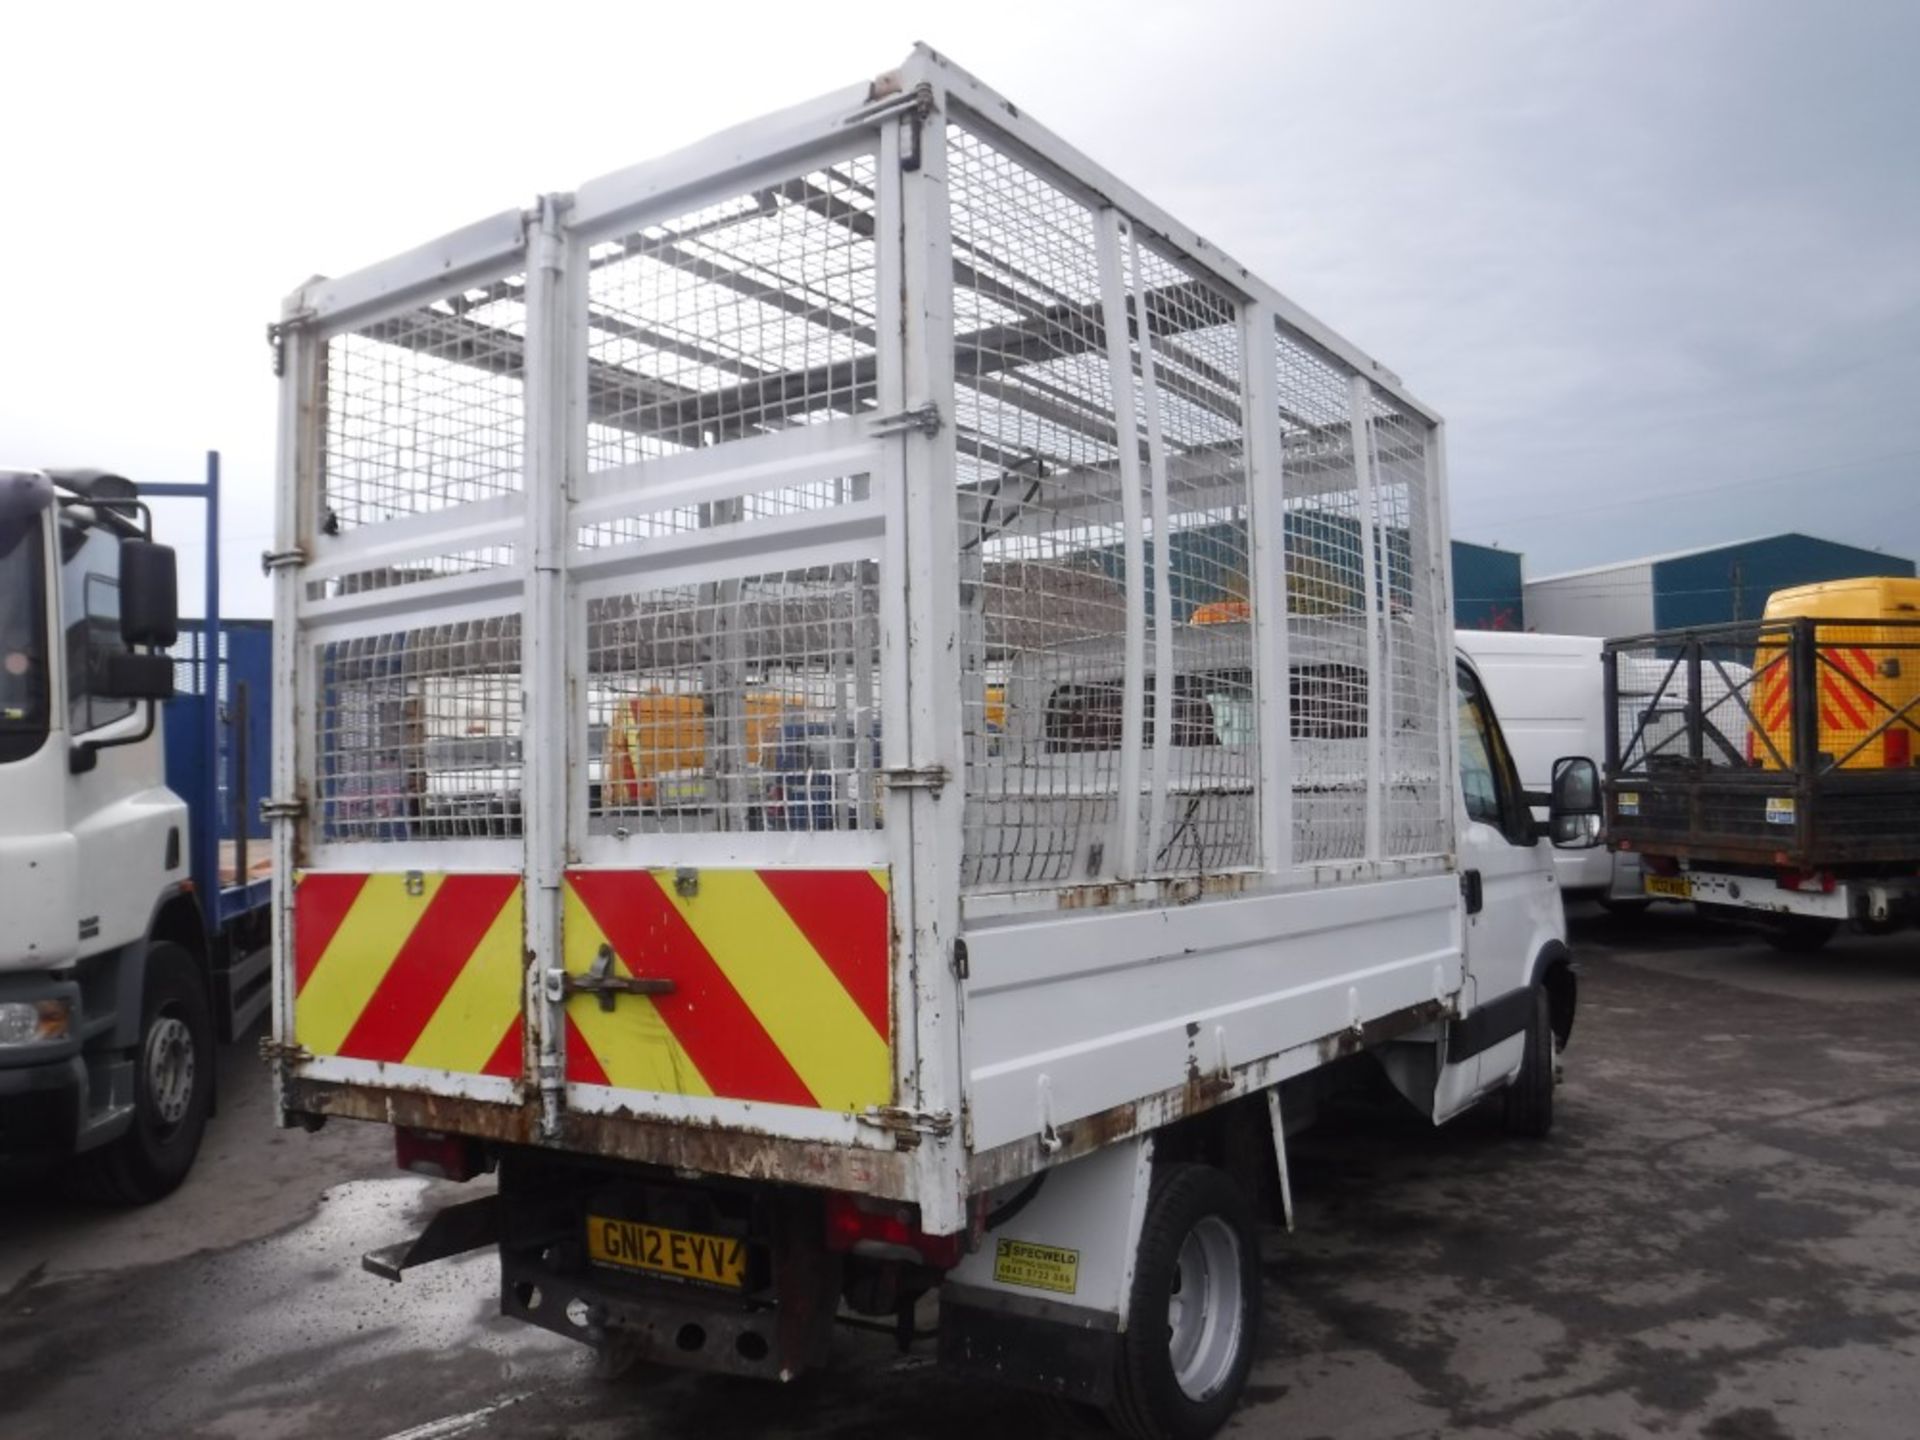 12 reg IVECO DAILY 35C11 MWB CAGED TIPPER, 1ST REG 04/12, TEST 04/19, 102241M, V5 HERE, 1 FORMER - Image 4 of 5